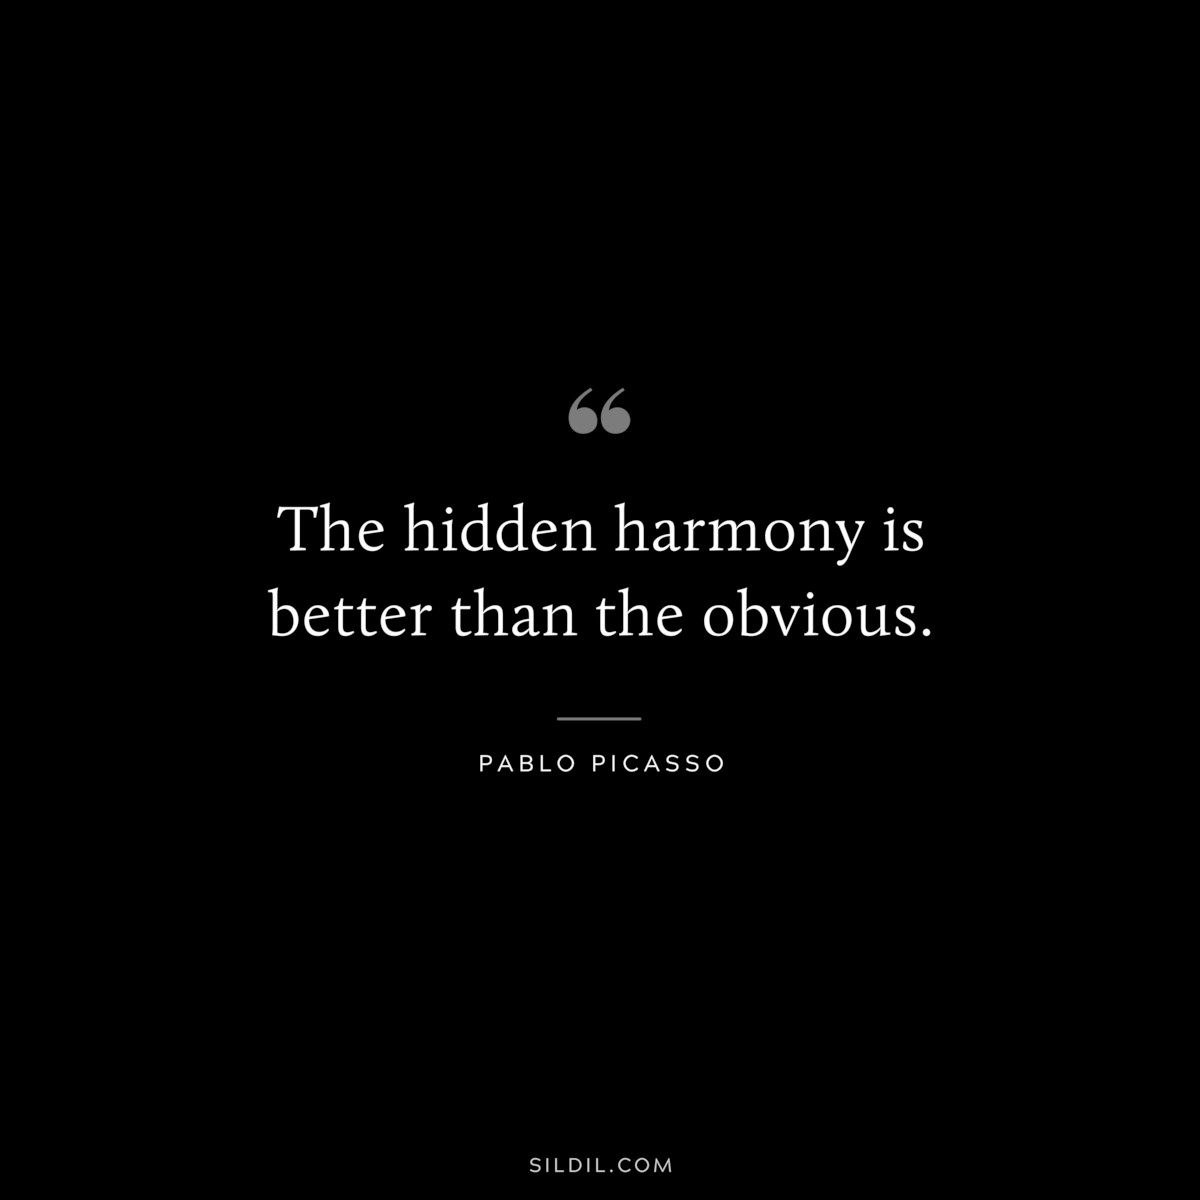 The hidden harmony is better than the obvious. ― Pablo Picasso